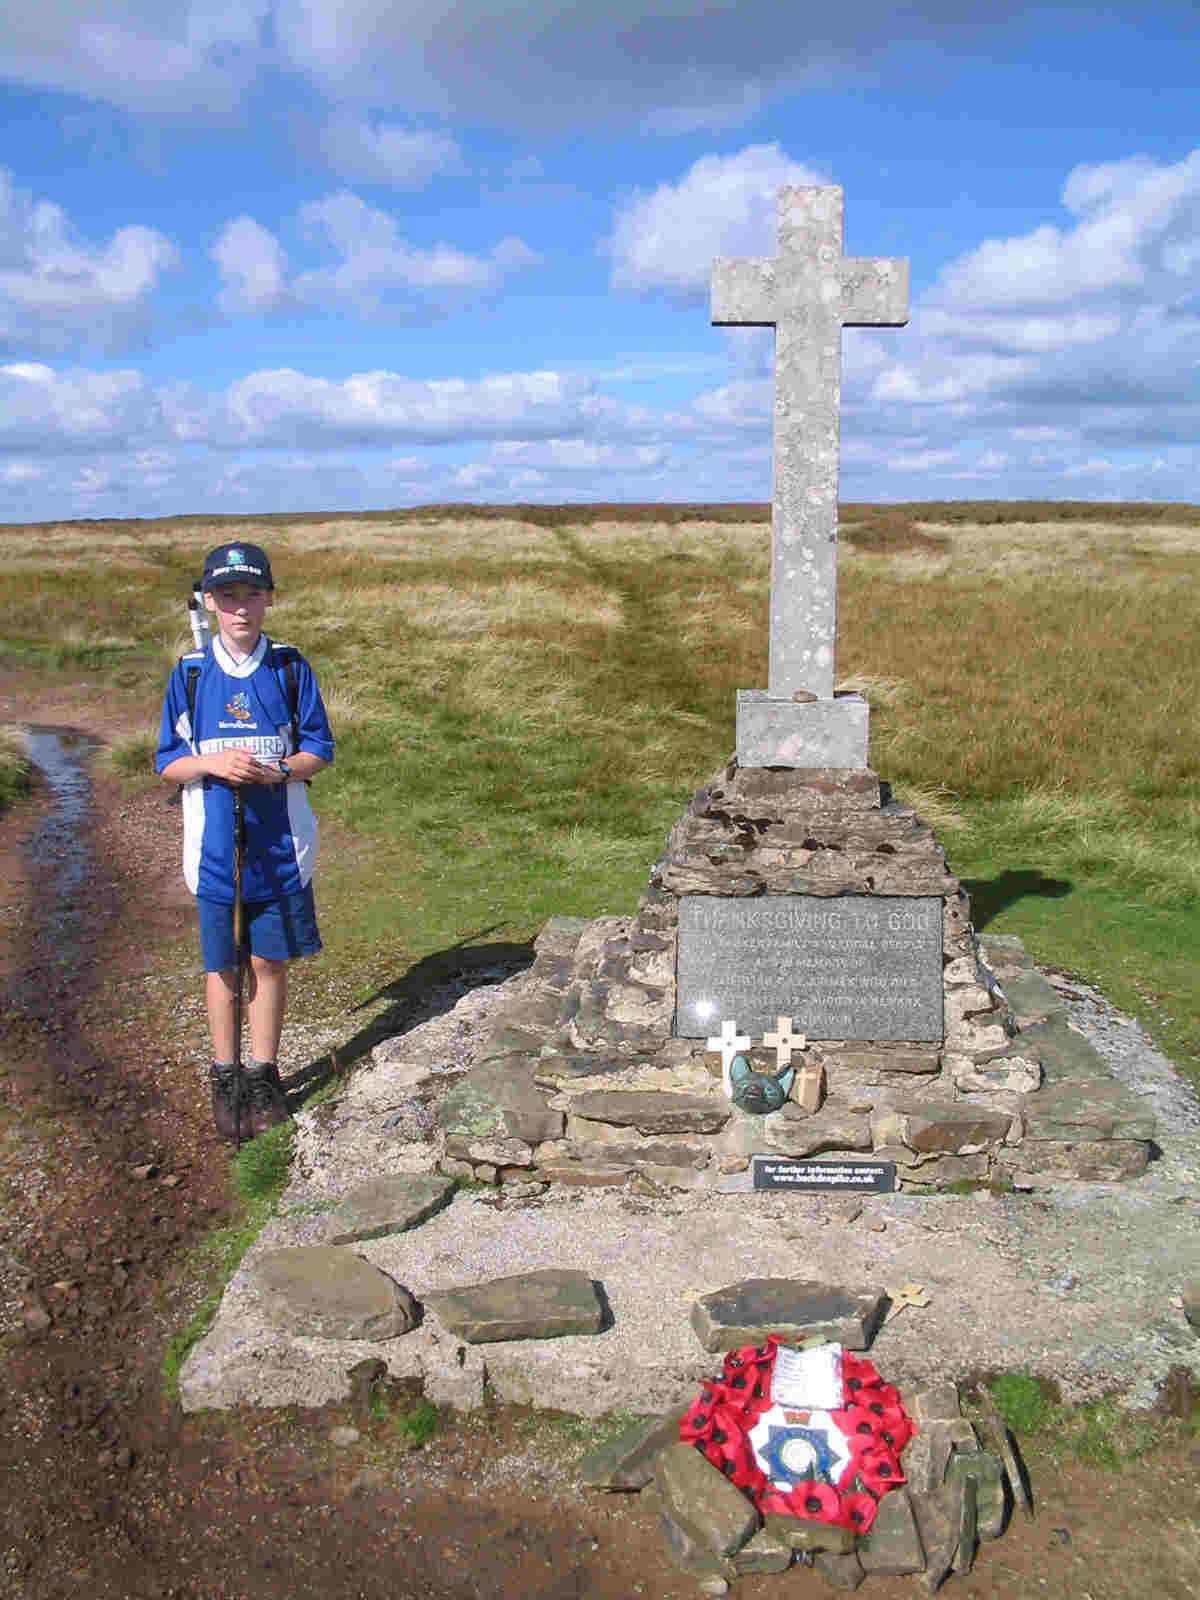 Jimmy at the Memorial Cross, in memory of the Polish airmen who lost their lives here in 1942